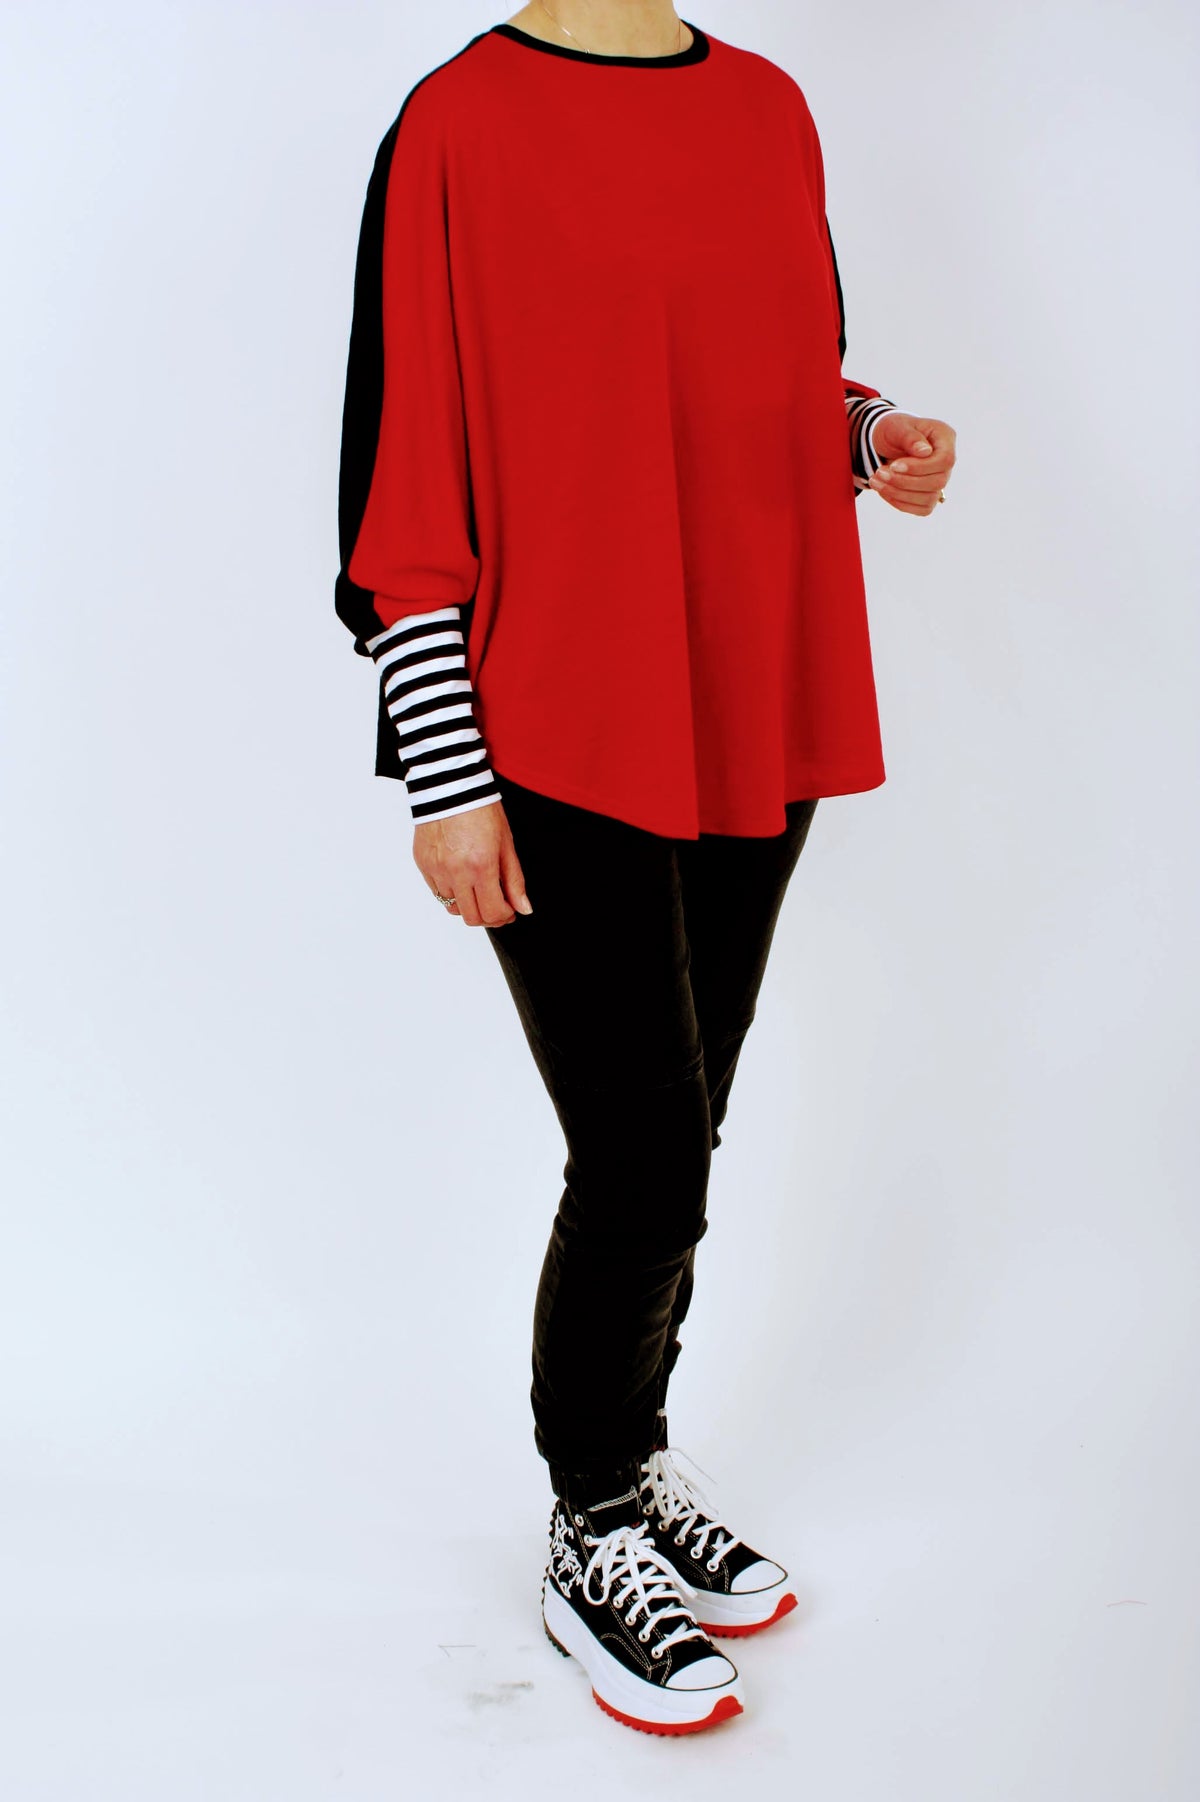 Poncho Merino Reversible - Red and Black with Black and White stripe Cuff - Pre Order 2 - 3 Weeks